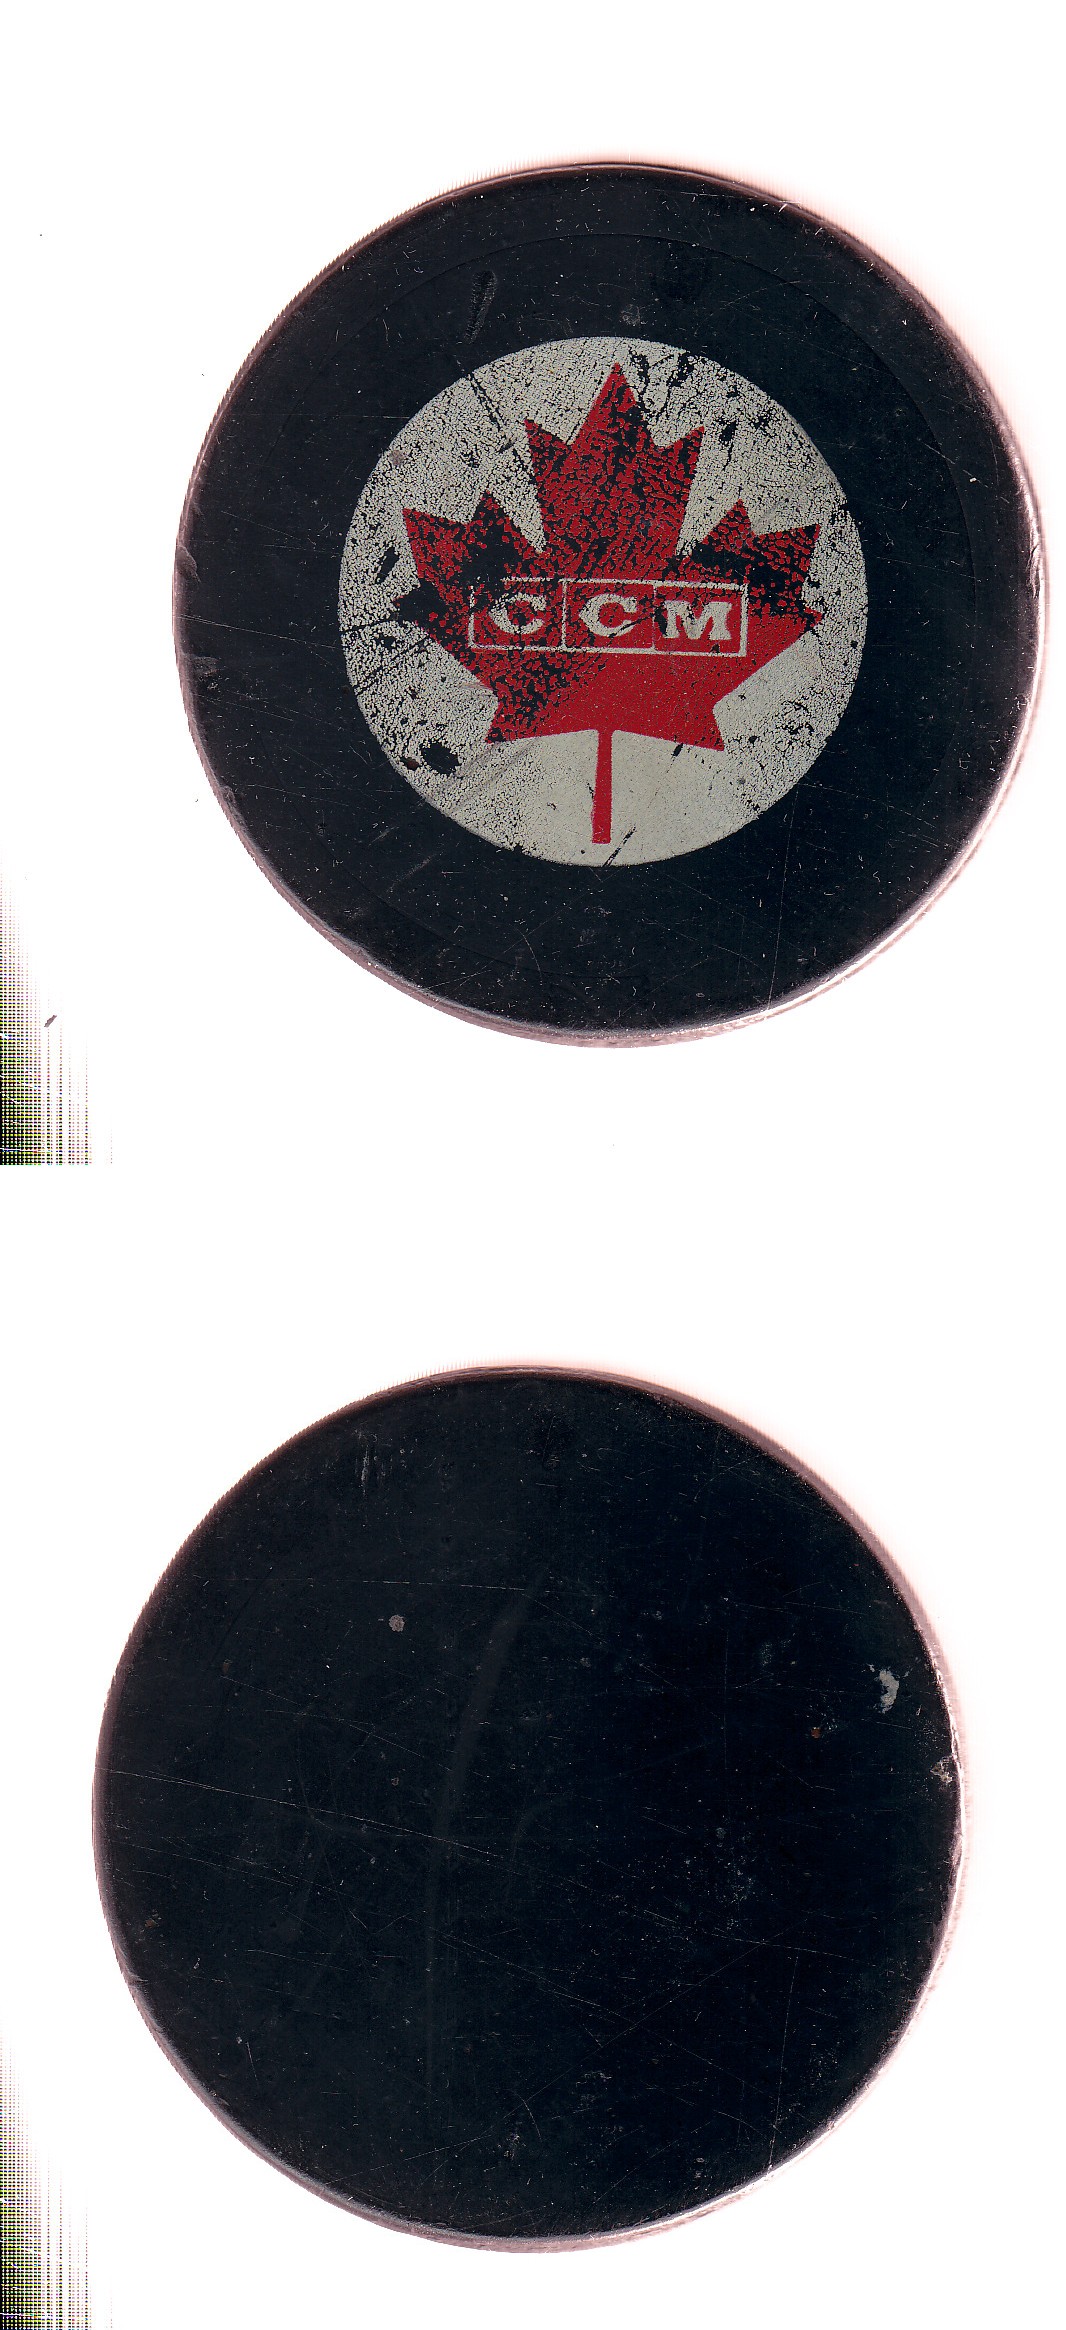 1976 VICEROY CANADA CUP SERIES GAME PUCK photo